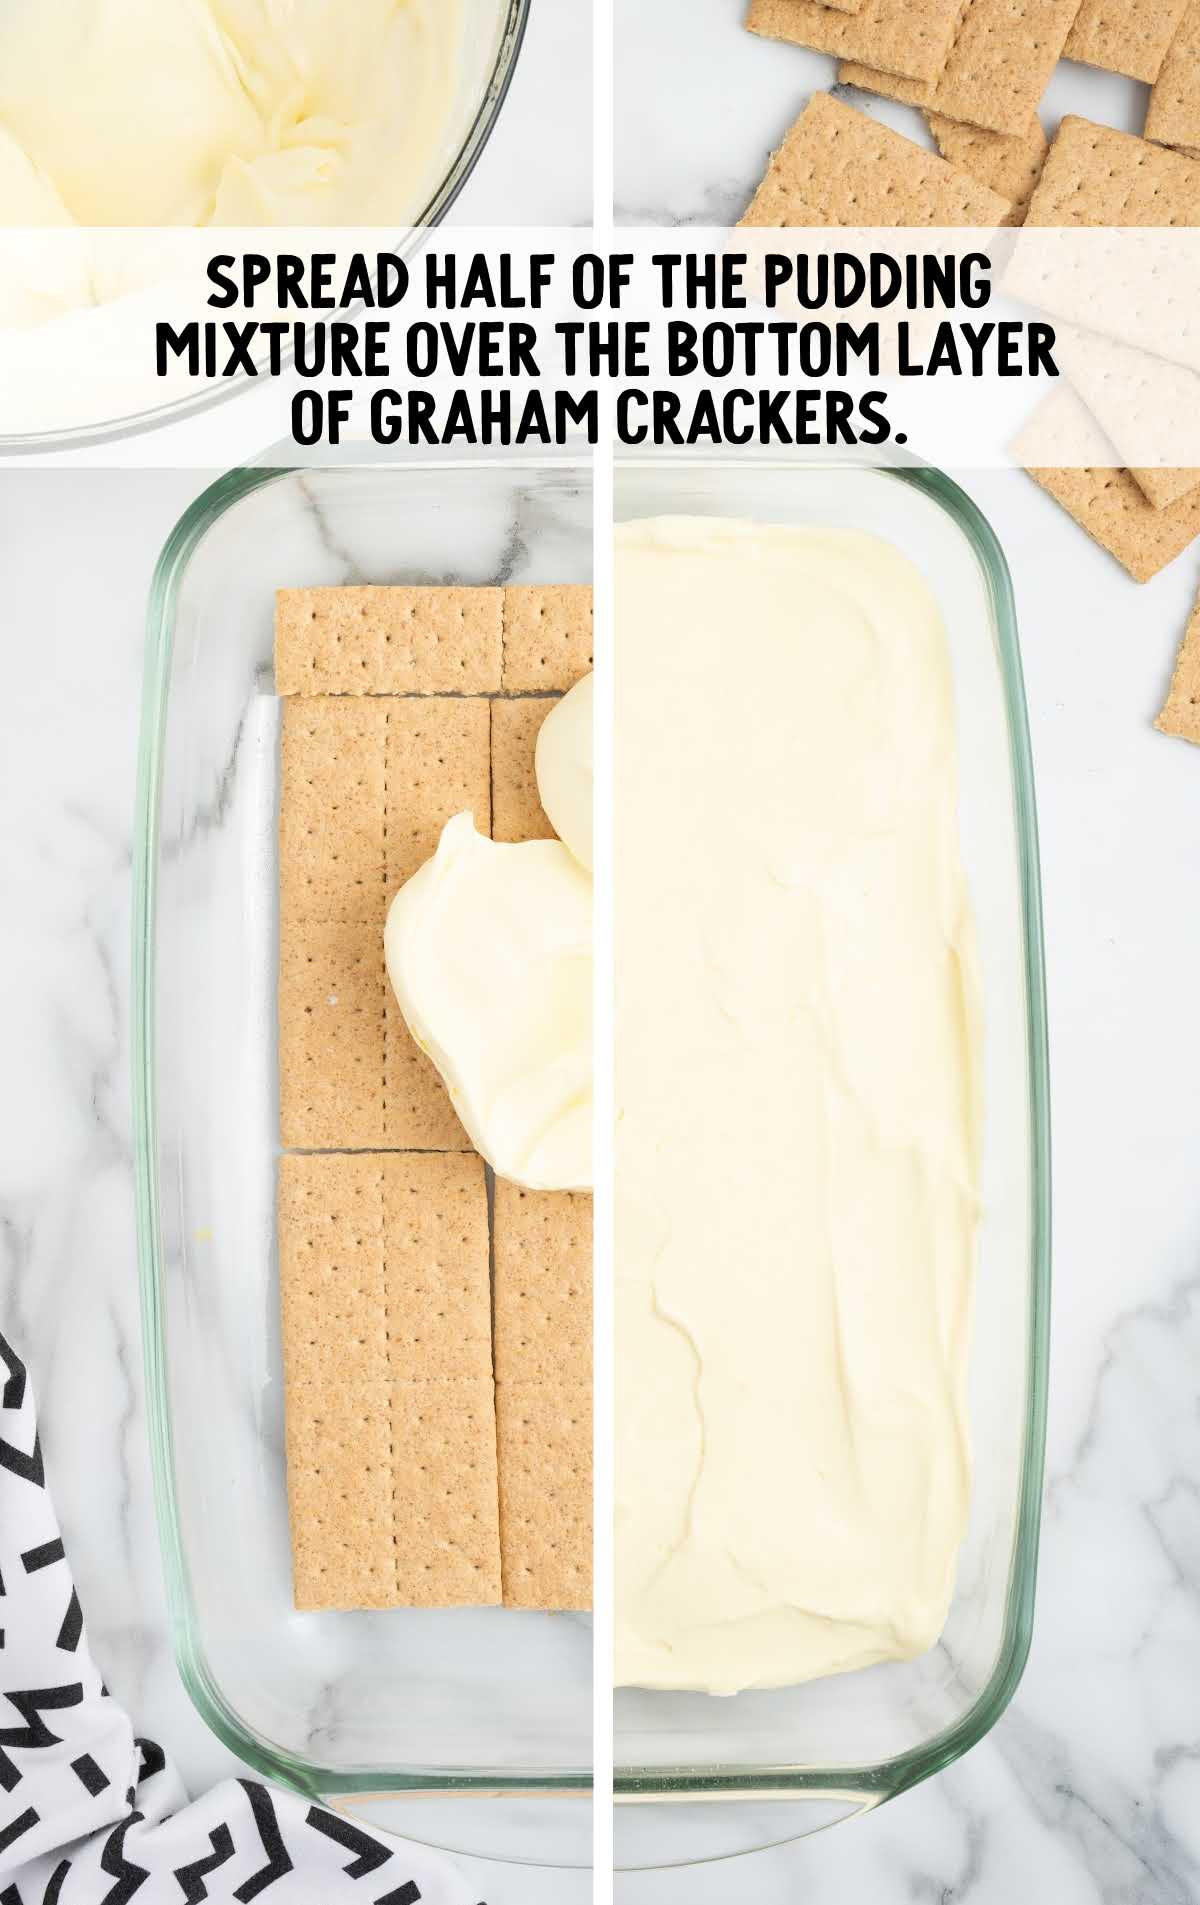 pudding mixture spread over the bottom layer of the graham cracker